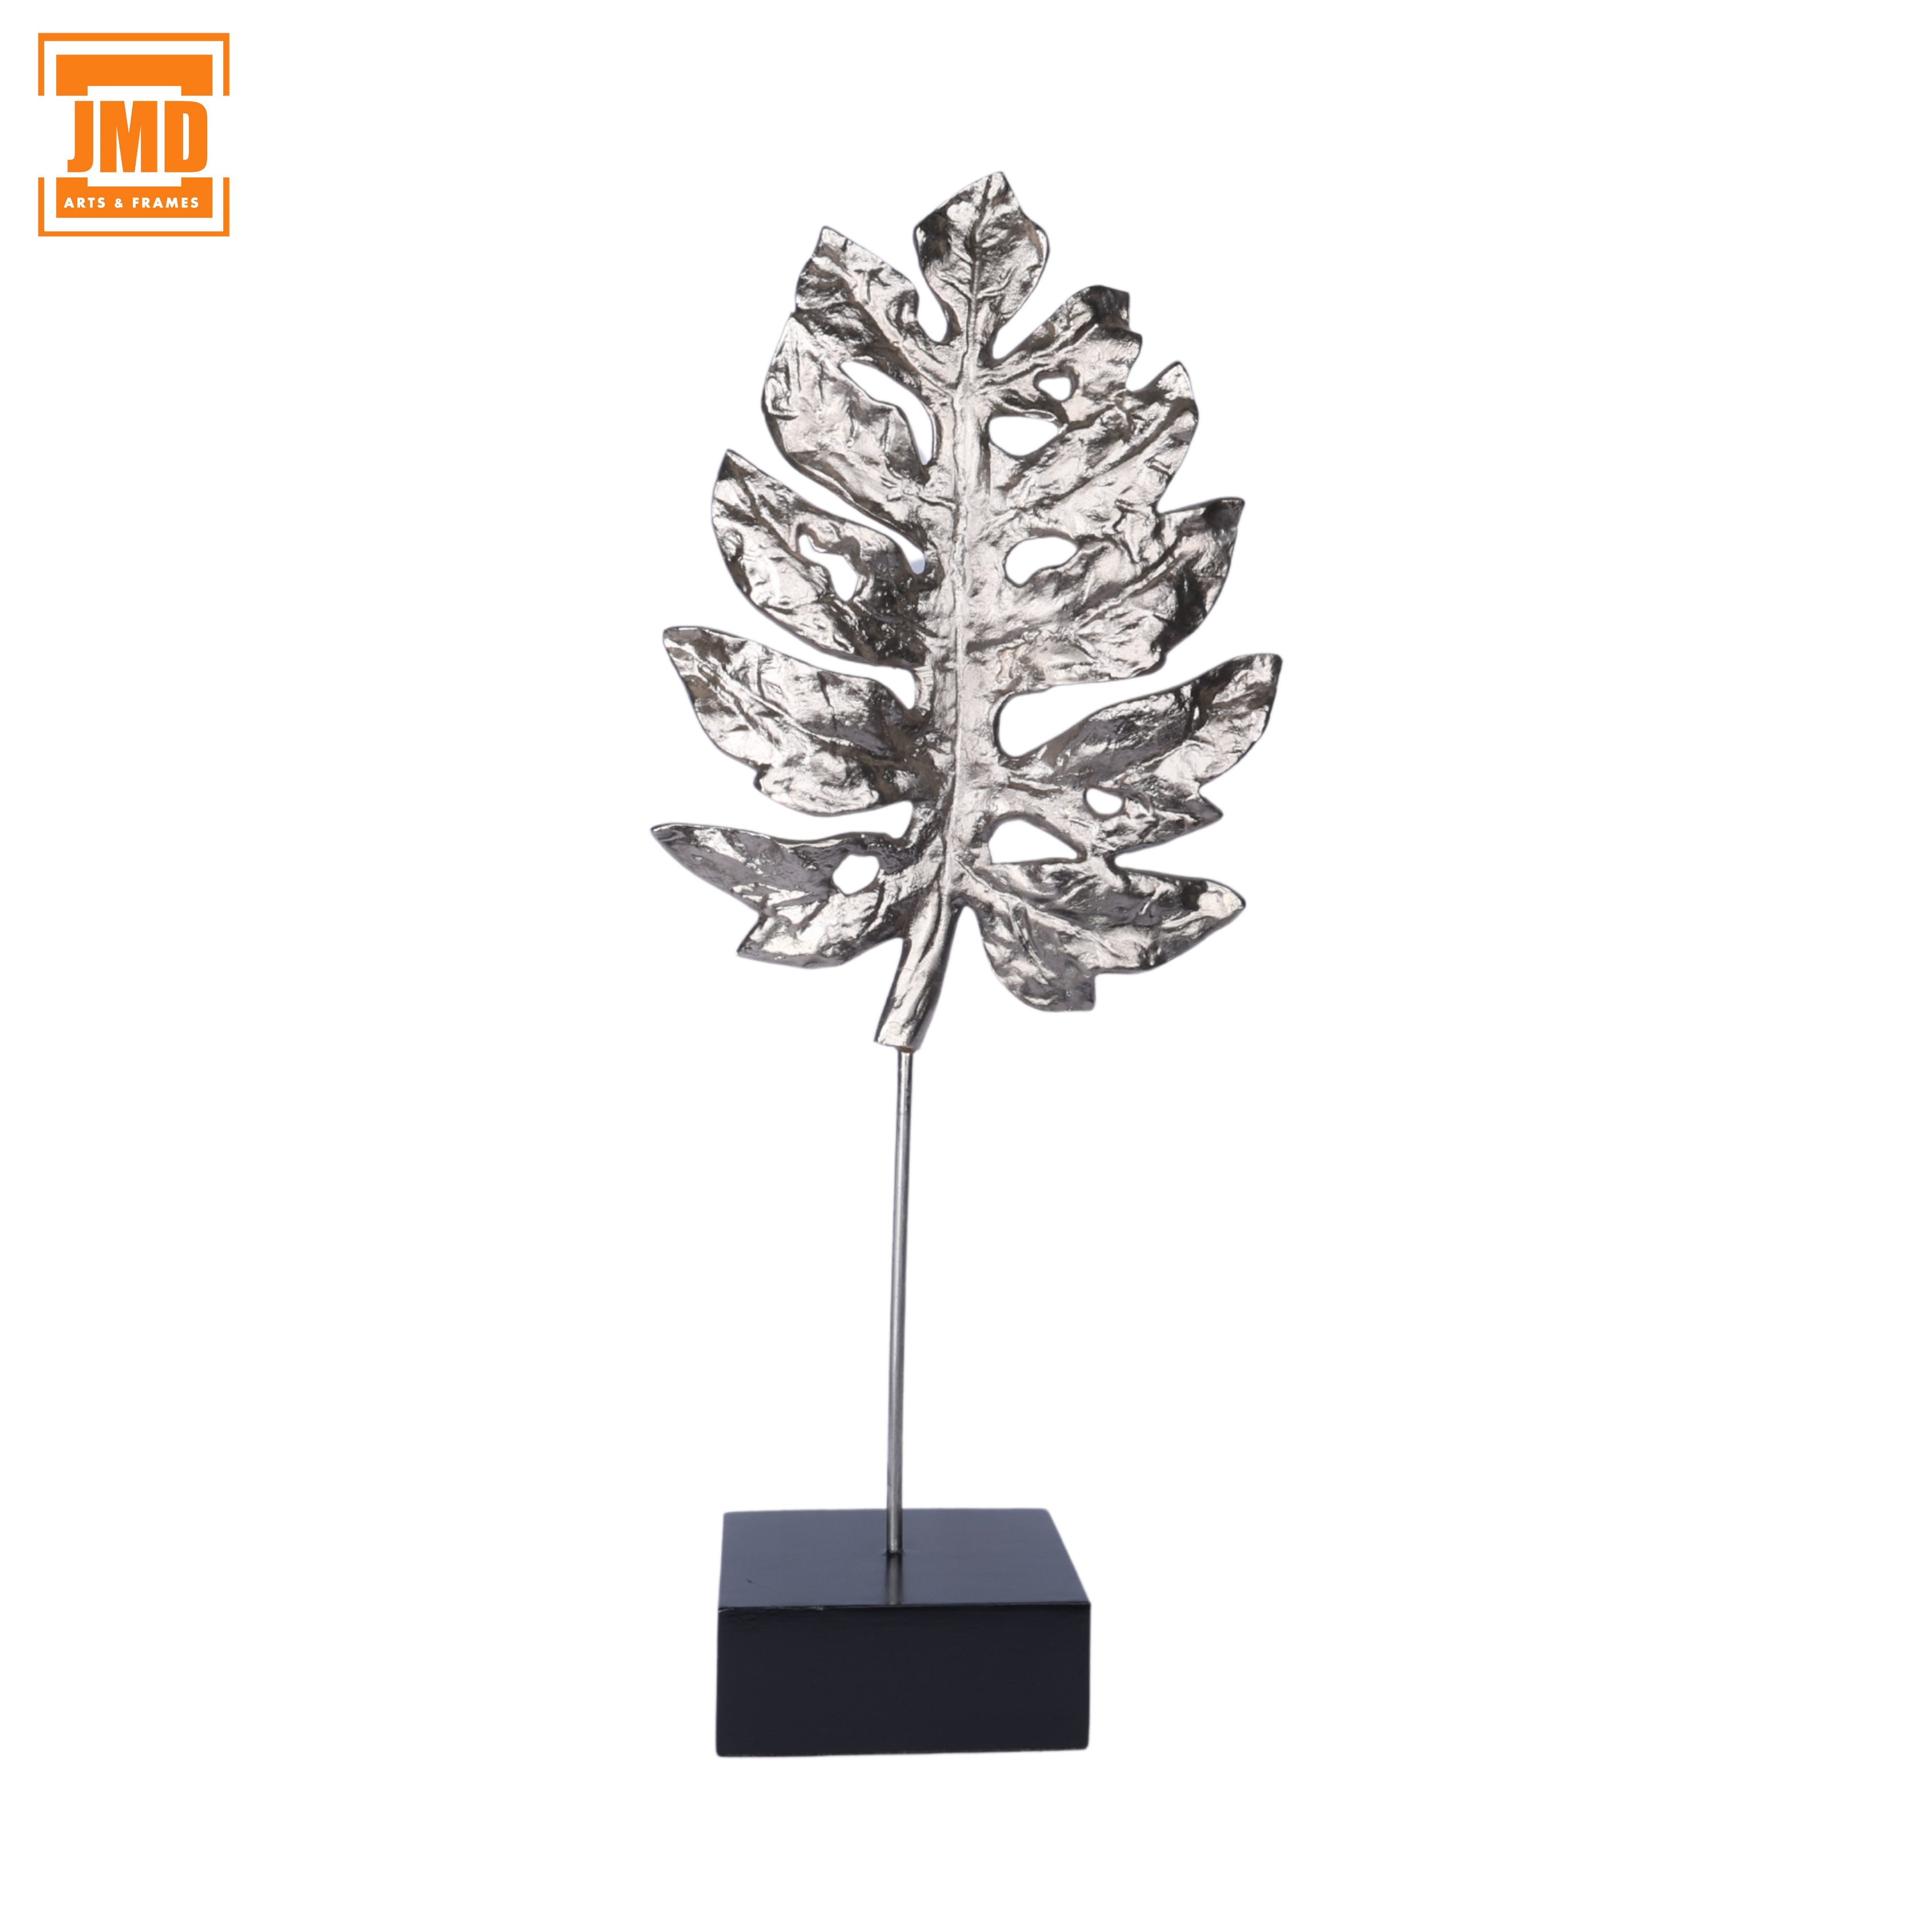 SILVER LEAF ON STAND